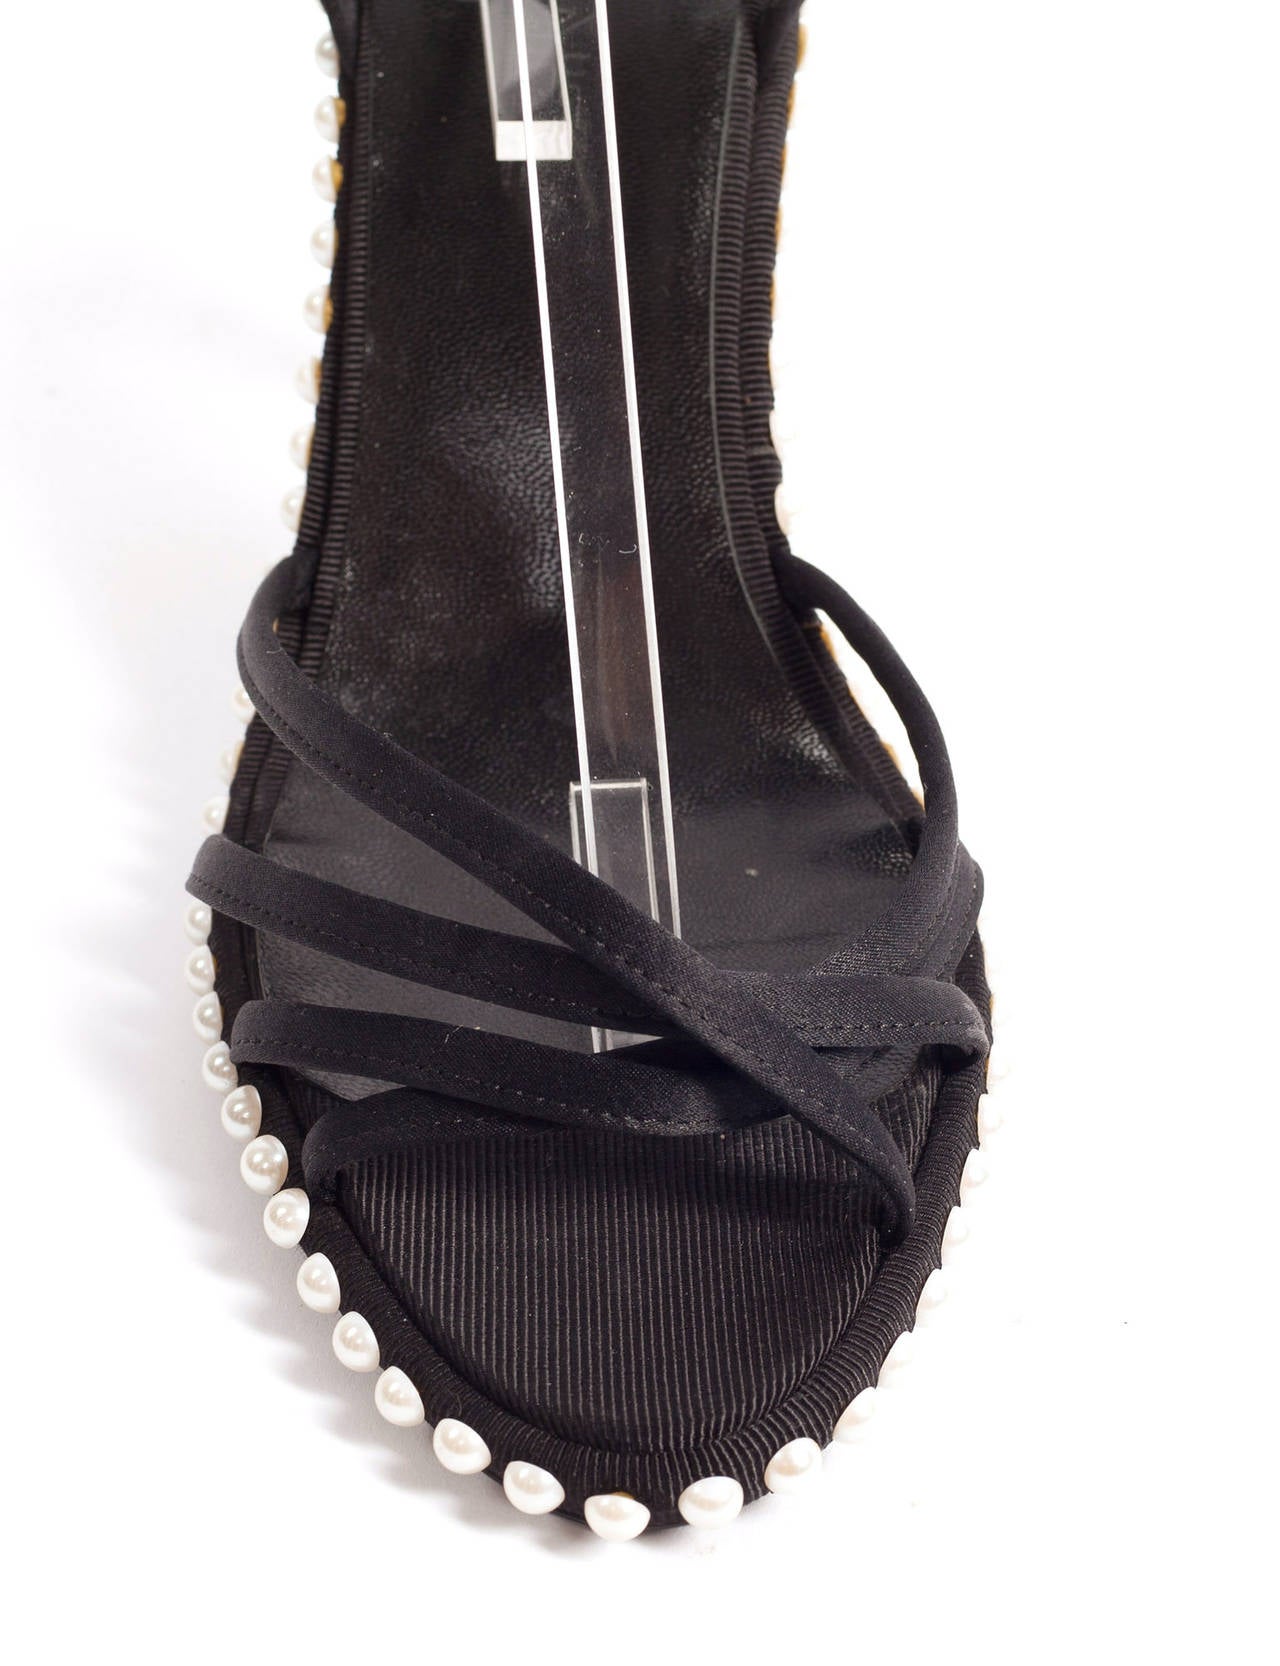 Chanel black satin Sandals with Pearl detail, Sz. 8.5 4